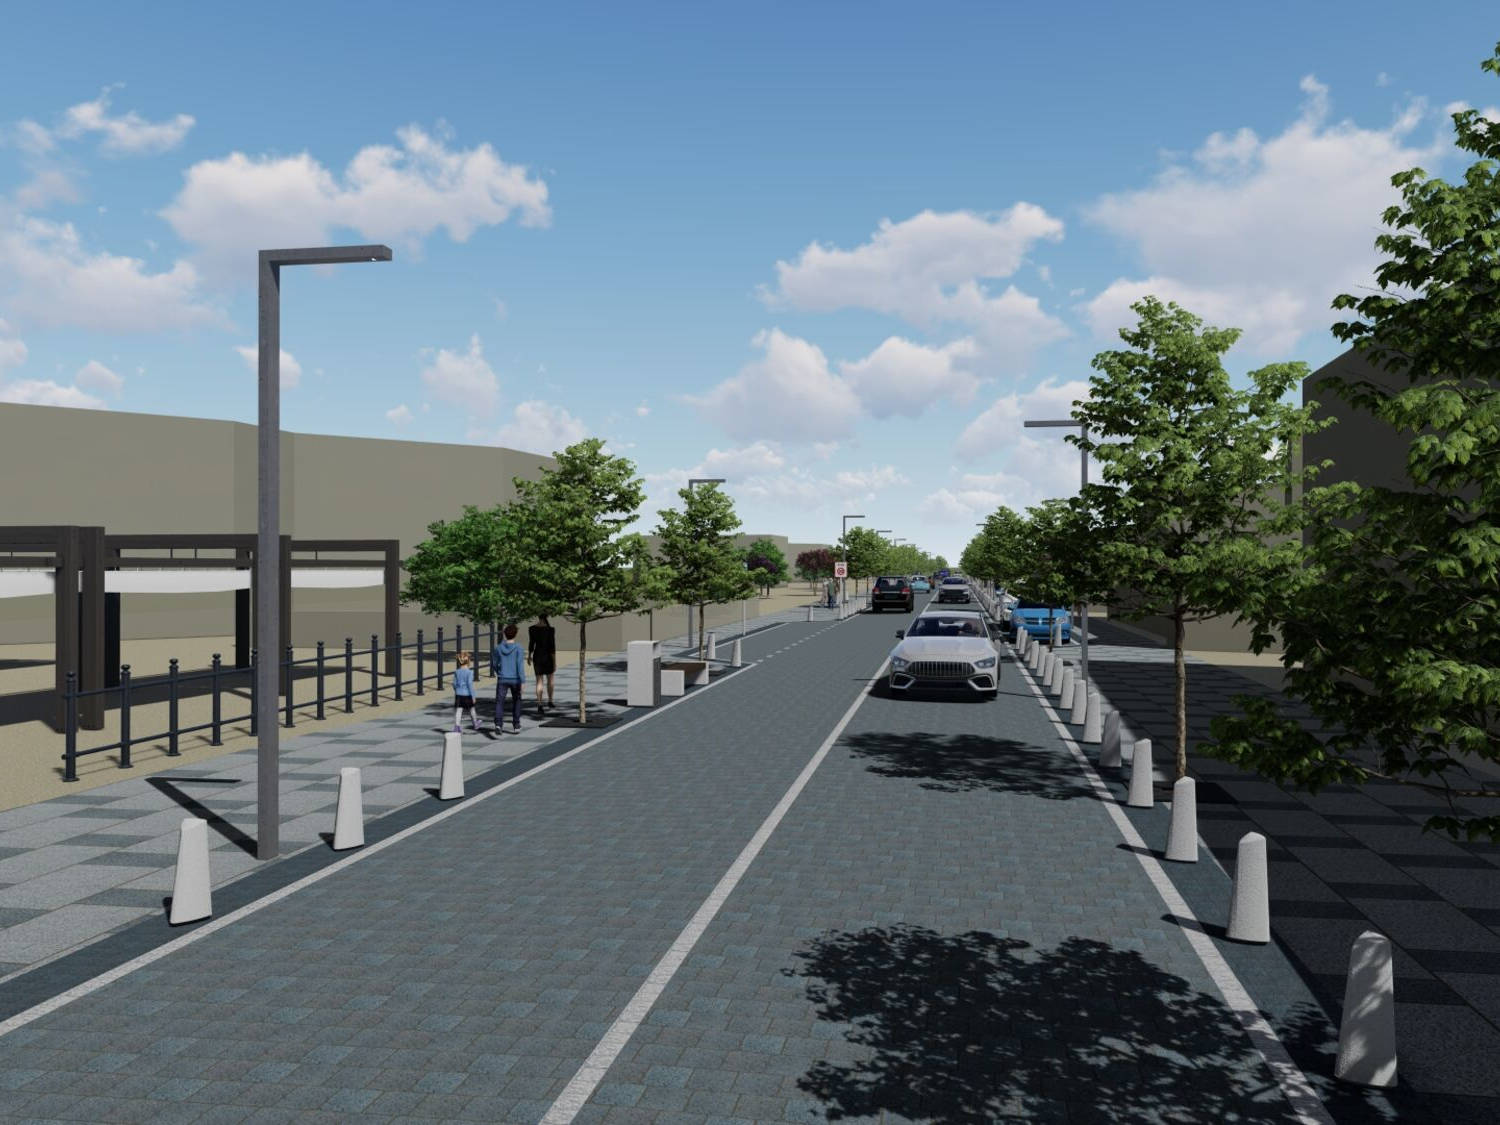 3D render showing proposed road design, perspective view